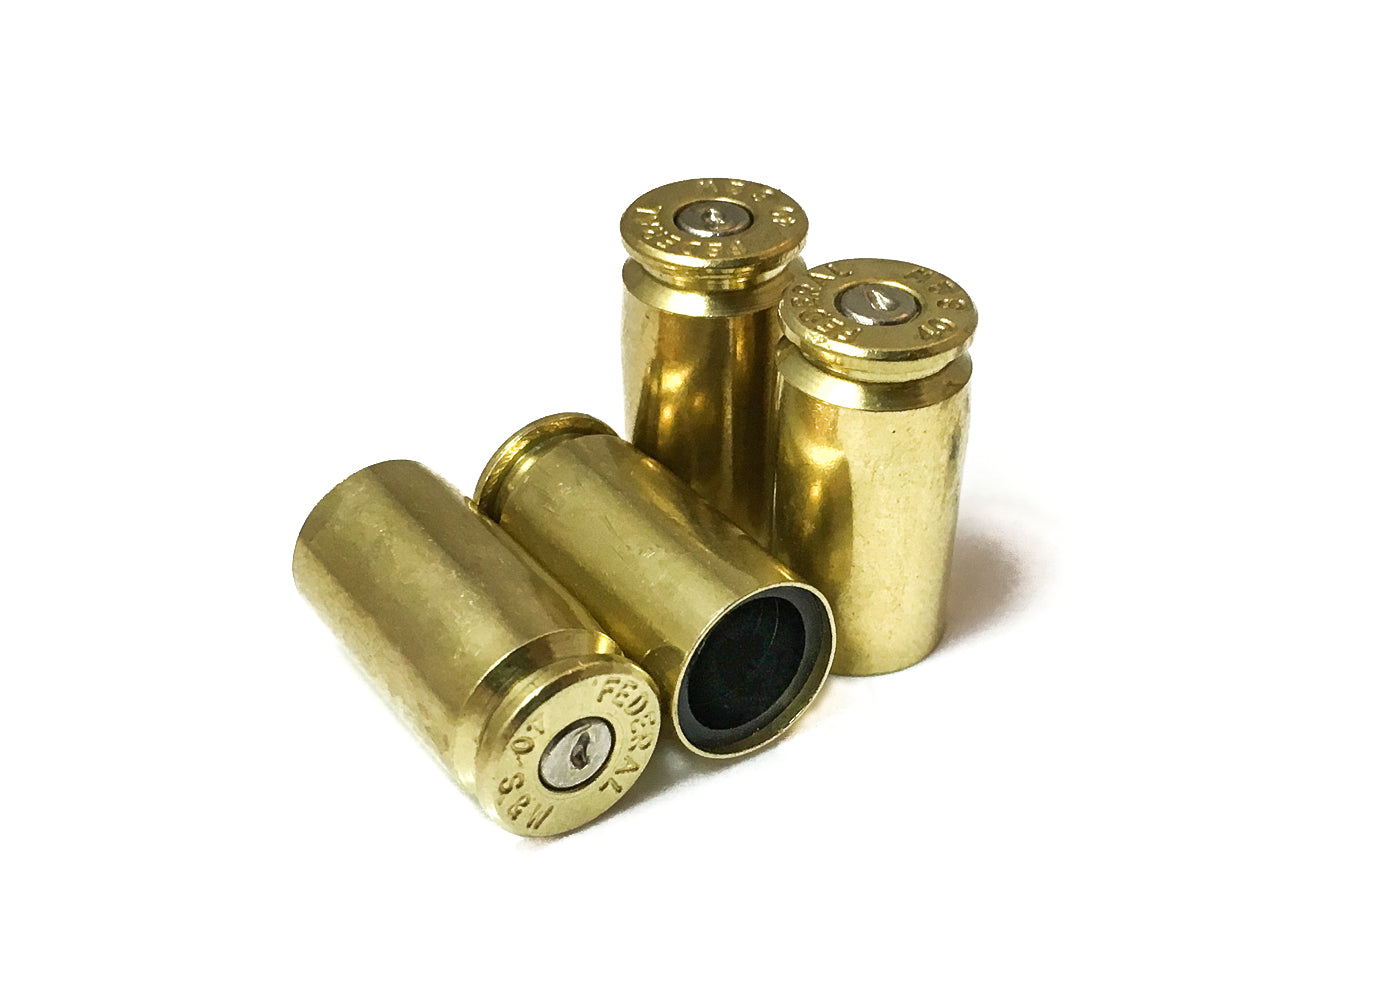  Hollow-Point Gear Silver Bullet Valve Caps - Metal Bullet Valve  Caps for Cars, Trucks, and ATVs. Real Bullet Casings! : Automotive